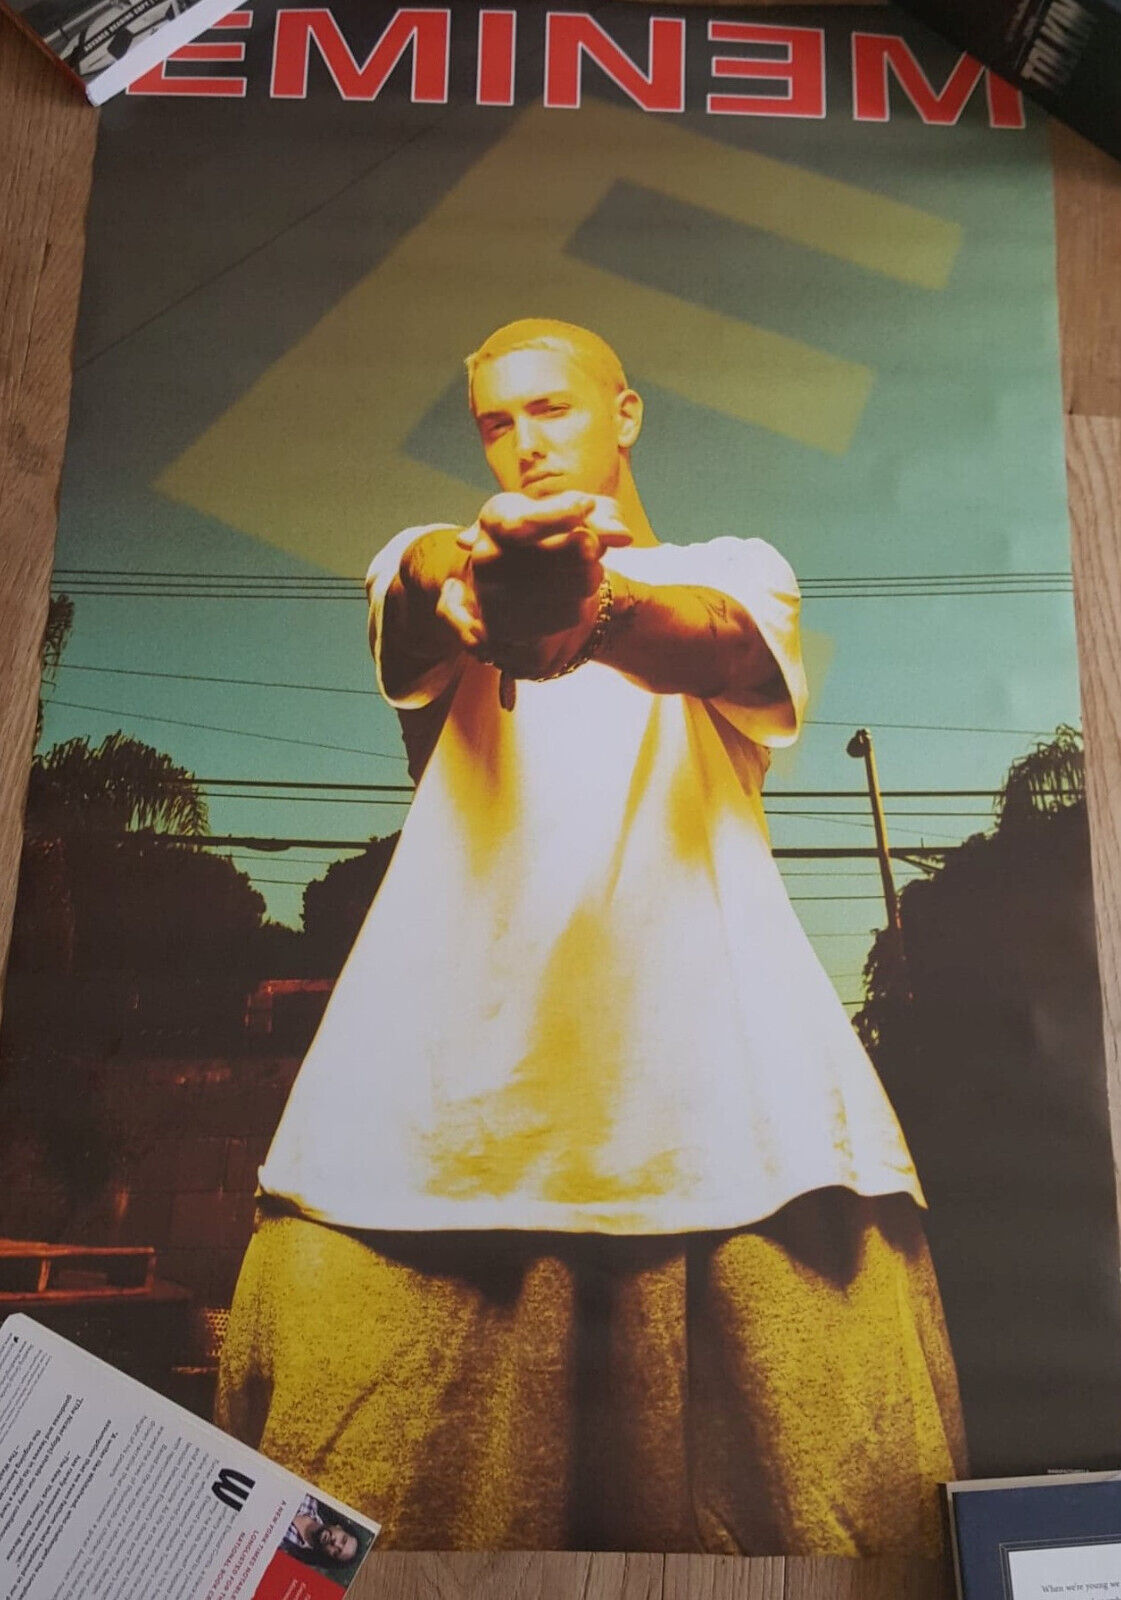 Eminem Poster Rare And Vintage. New Poster From 2002/03. Perfect Condition!